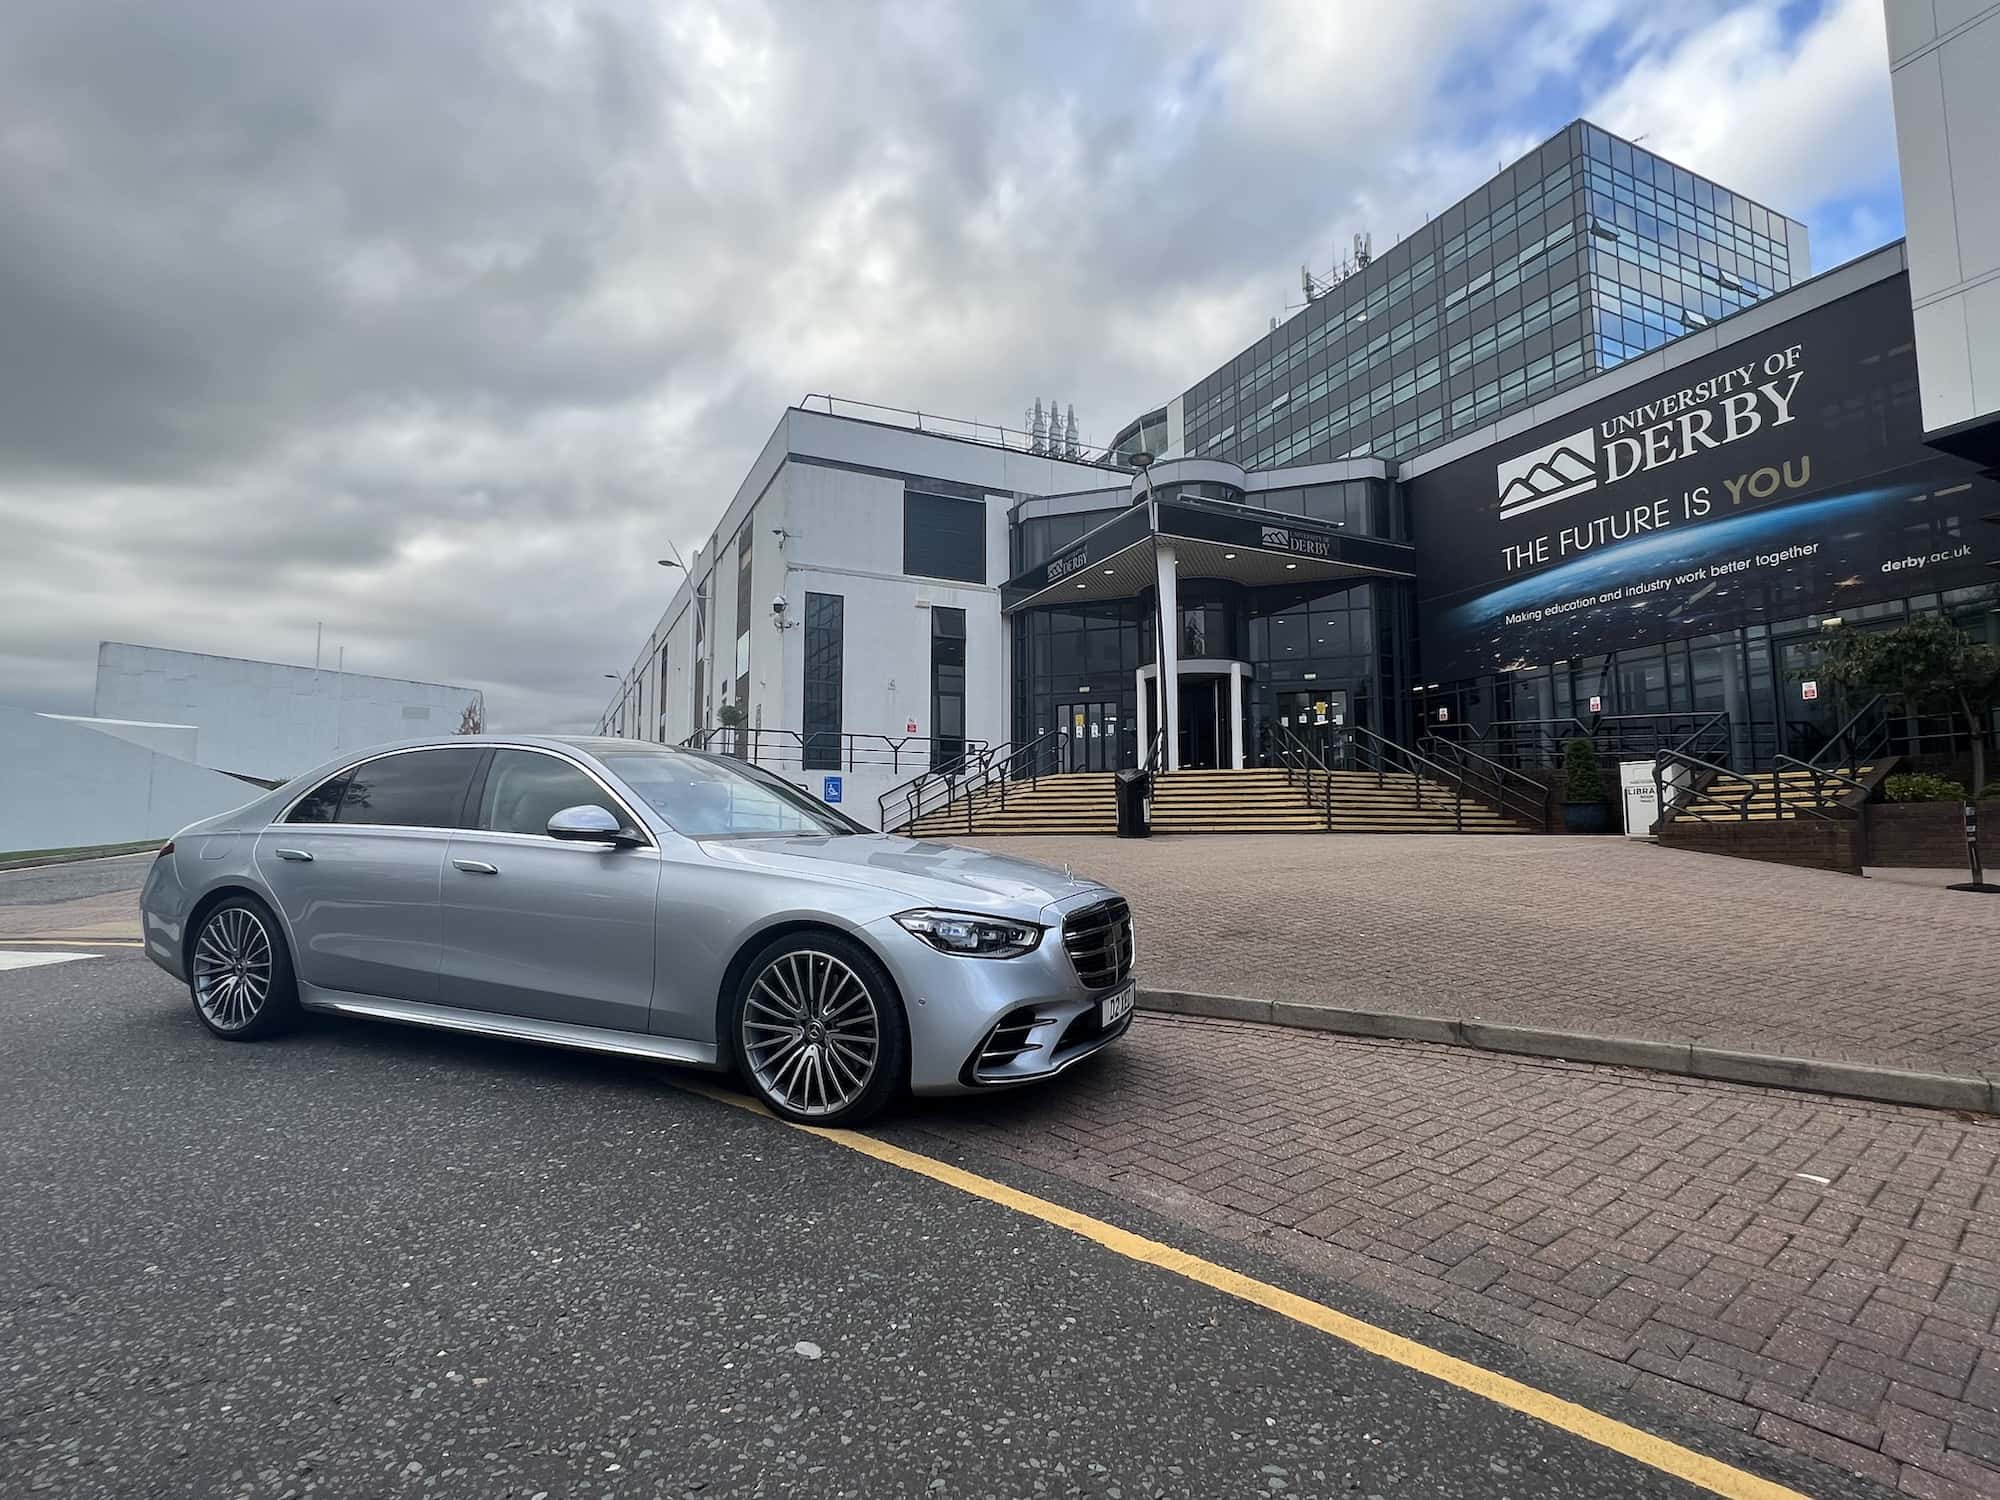 Mercedes S Class BUsiness HIre for Derby University